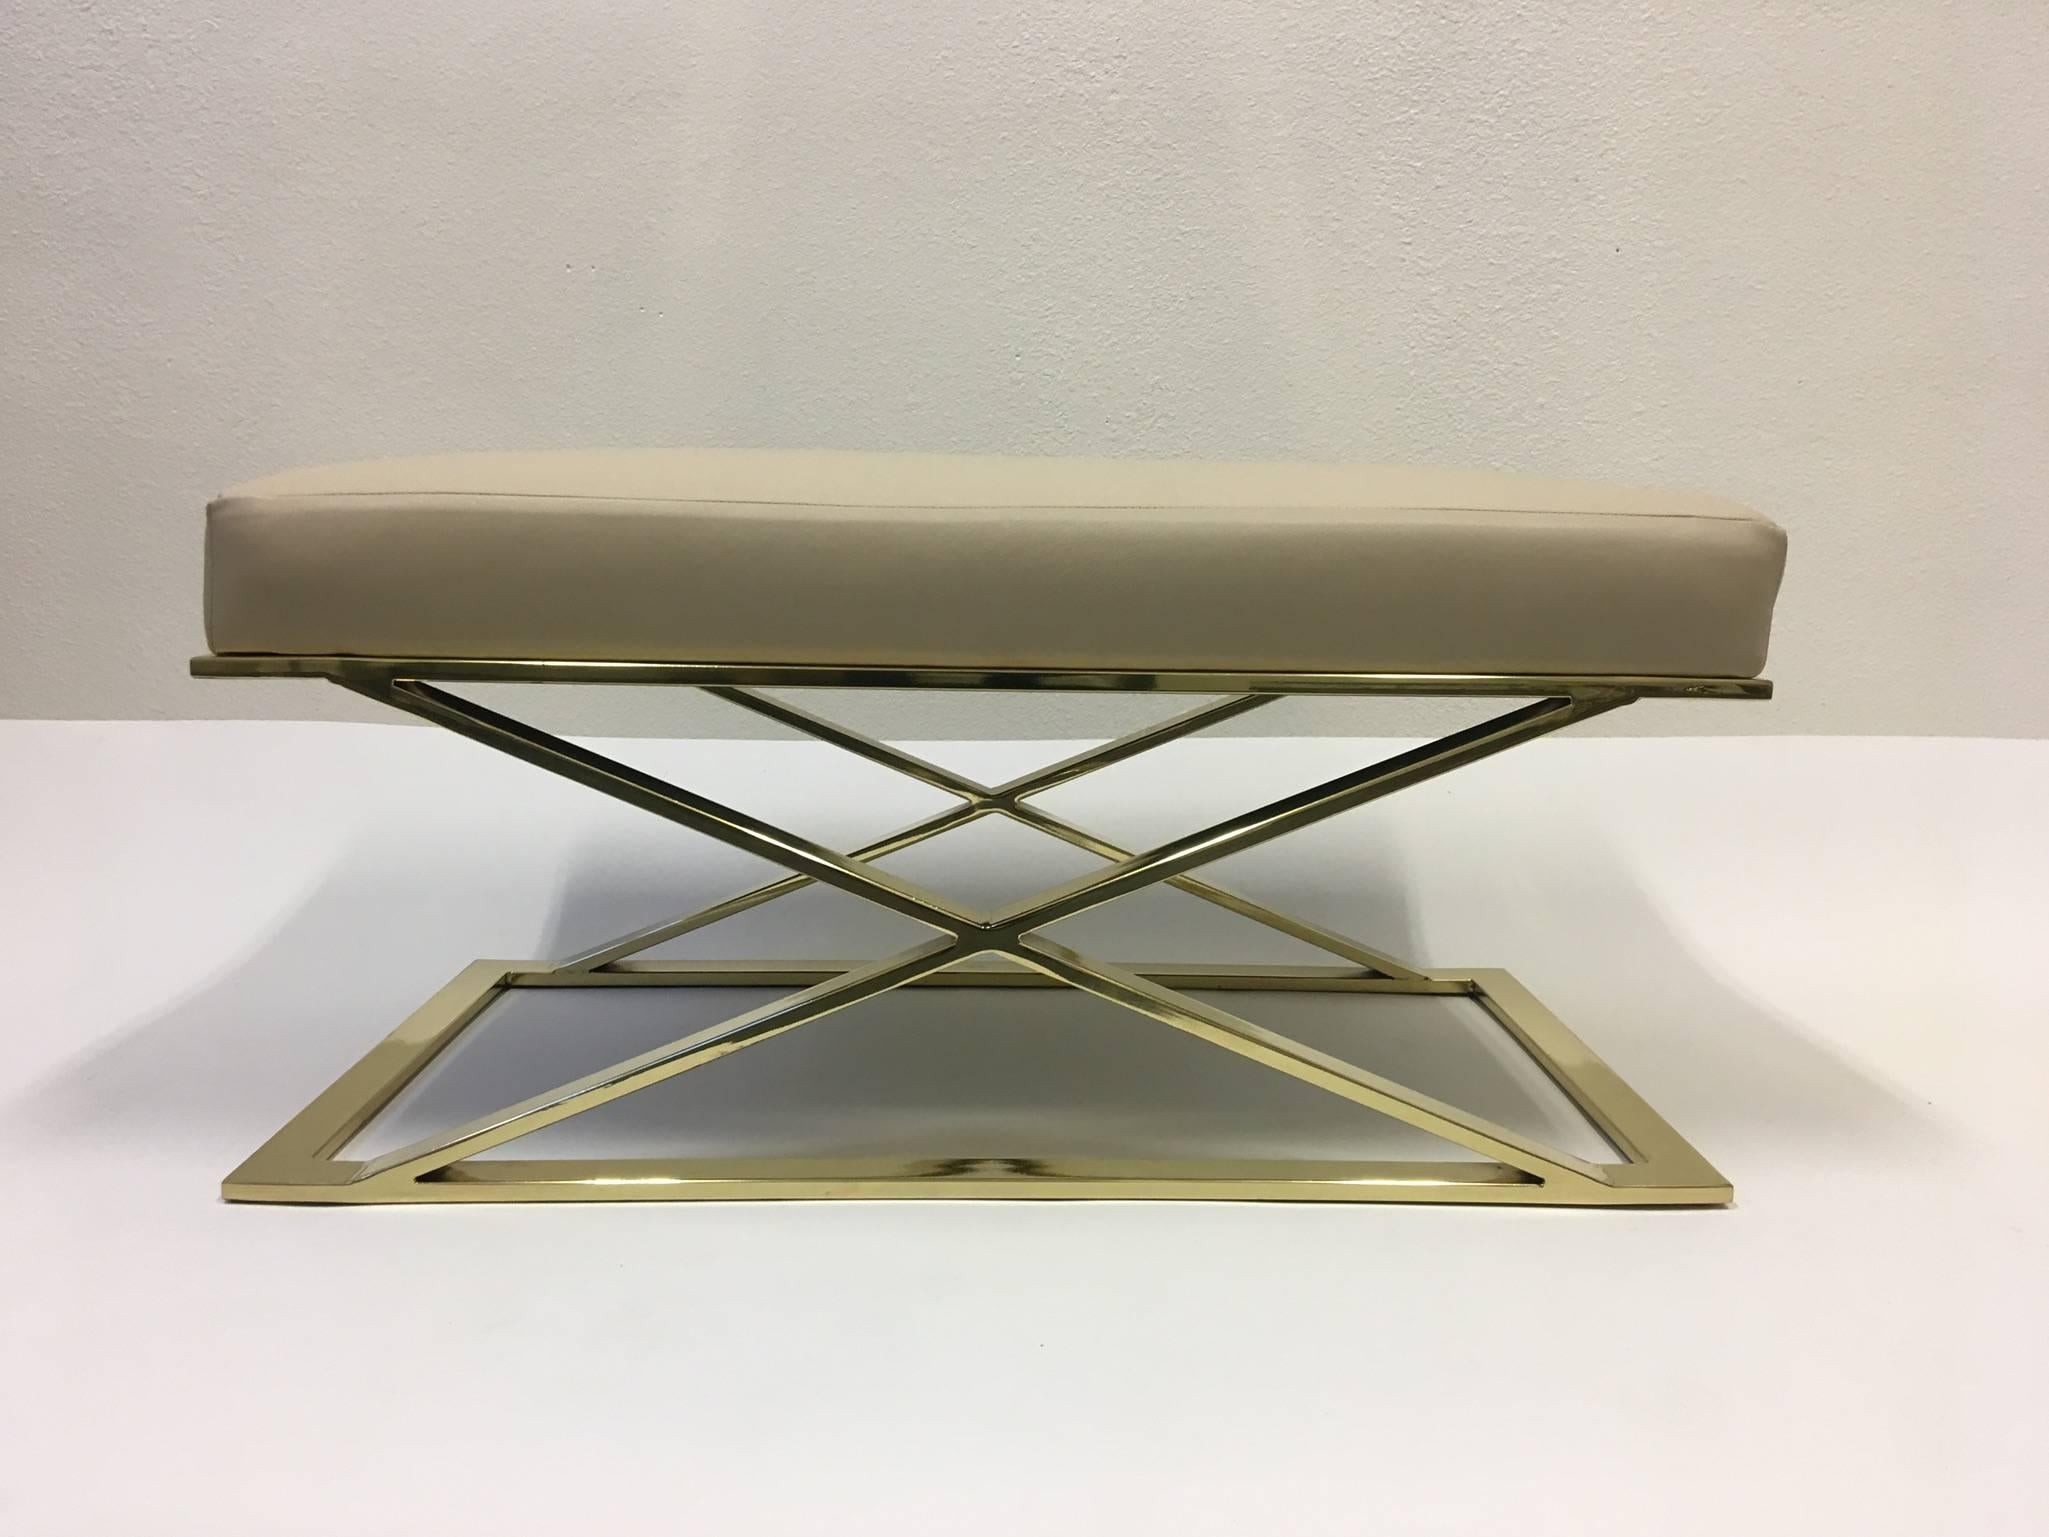 A glamorous pair of polished brass and cream leather X-base benches designed by Milo Baughman for Thayer Coggin in the 1970s. 
We purchased them in this condition (excellent). We believe they have been replated and reupholstered with this soft